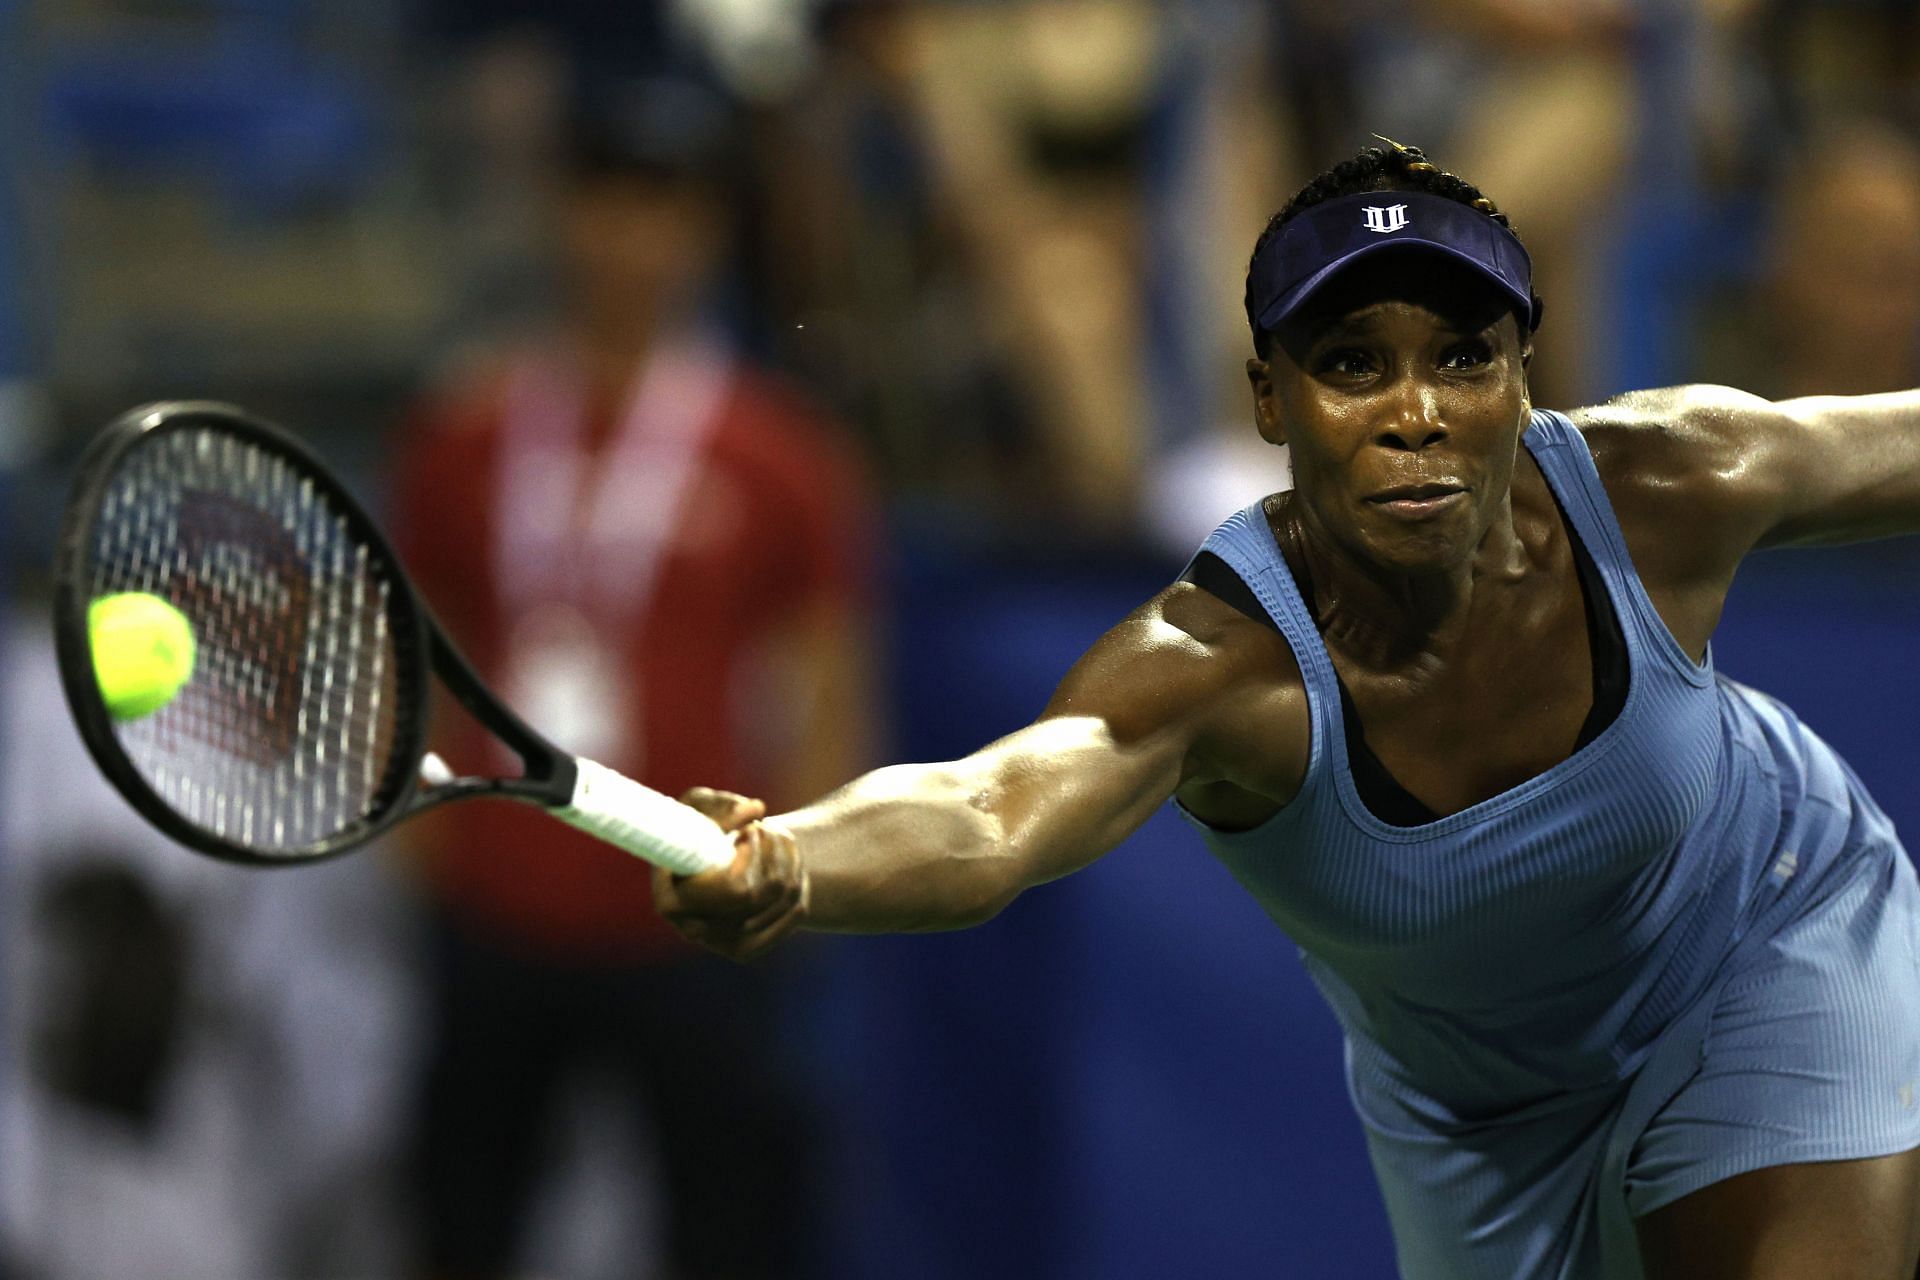 Venus Williams will next play at the Canadian Open